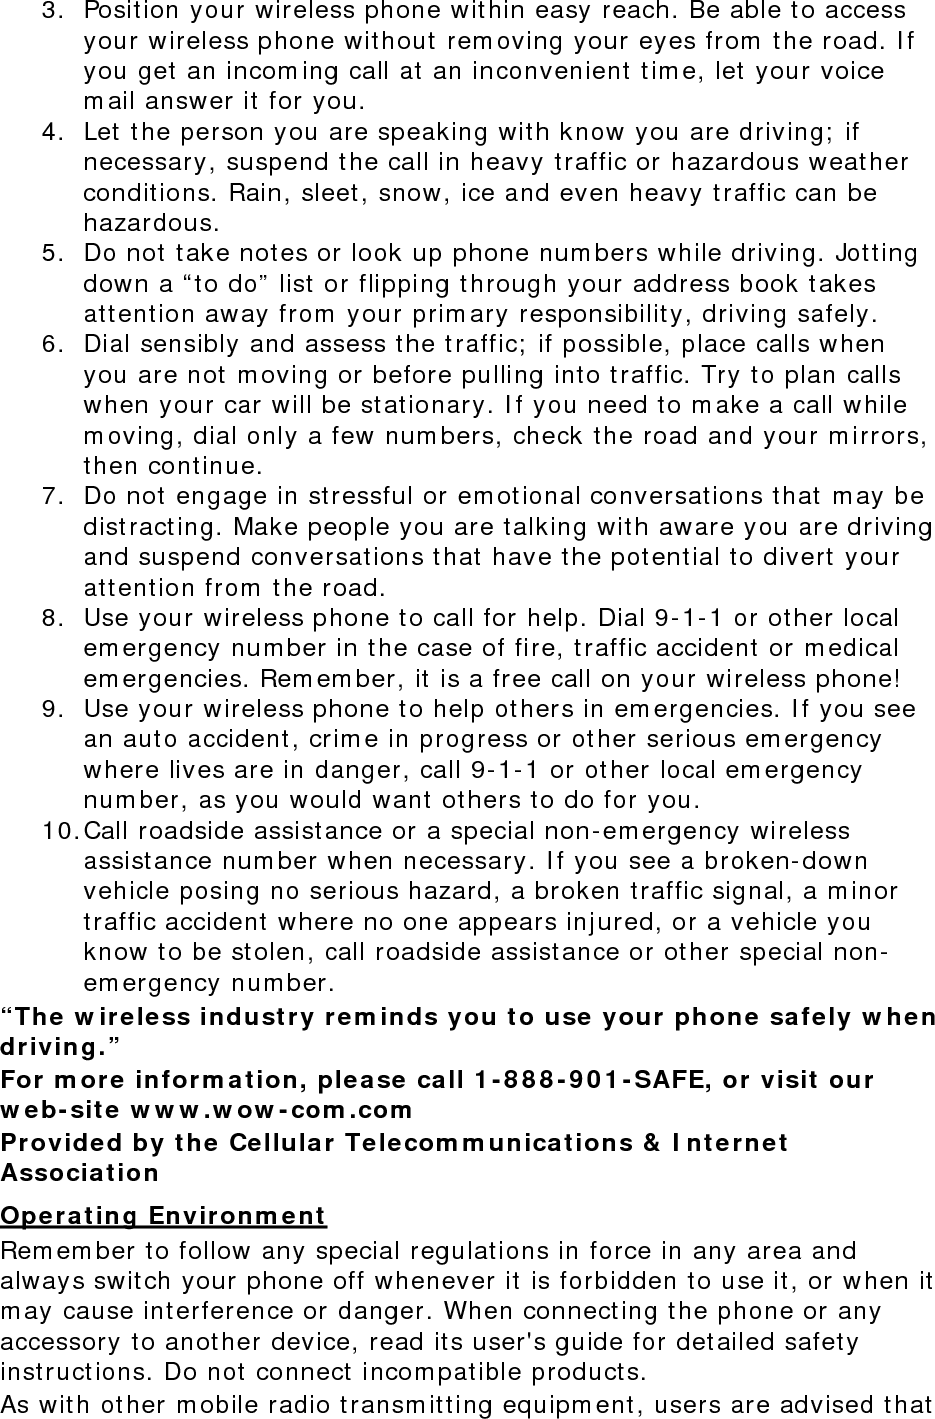 3. Position your wireless phone within easy reach. Be able to access your wireless phone without removing your eyes from the road. If you get an incoming call at an inconvenient time, let your voice mail answer it for you. 4. Let the person you are speaking with know you are driving; if necessary, suspend the call in heavy traffic or hazardous weather conditions. Rain, sleet, snow, ice and even heavy traffic can be hazardous. 5. Do not take notes or look up phone numbers while driving. Jotting down a “to do” list or flipping through your address book takes attention away from your primary responsibility, driving safely. 6. Dial sensibly and assess the traffic; if possible, place calls when you are not moving or before pulling into traffic. Try to plan calls when your car will be stationary. If you need to make a call while moving, dial only a few numbers, check the road and your mirrors, then continue. 7. Do not engage in stressful or emotional conversations that may be distracting. Make people you are talking with aware you are driving and suspend conversations that have the potential to divert your attention from the road. 8. Use your wireless phone to call for help. Dial 9-1-1 or other local emergency number in the case of fire, traffic accident or medical emergencies. Remember, it is a free call on your wireless phone! 9. Use your wireless phone to help others in emergencies. If you see an auto accident, crime in progress or other serious emergency where lives are in danger, call 9-1-1 or other local emergency number, as you would want others to do for you. 10. Call roadside assistance or a special non-emergency wireless assistance number when necessary. If you see a broken-down vehicle posing no serious hazard, a broken traffic signal, a minor traffic accident where no one appears injured, or a vehicle you know to be stolen, call roadside assistance or other special non-emergency number. “The wireless industry reminds you to use your phone safely when driving.” For more information, please call 1-888-901-SAFE, or visit our web-site www.wow-com.com Provided by the Cellular Telecommunications &amp; Internet Association Operating Environment Remember to follow any special regulations in force in any area and always switch your phone off whenever it is forbidden to use it, or when it may cause interference or danger. When connecting the phone or any accessory to another device, read its user&apos;s guide for detailed safety instructions. Do not connect incompatible products. As with other mobile radio transmitting equipment, users are advised that 